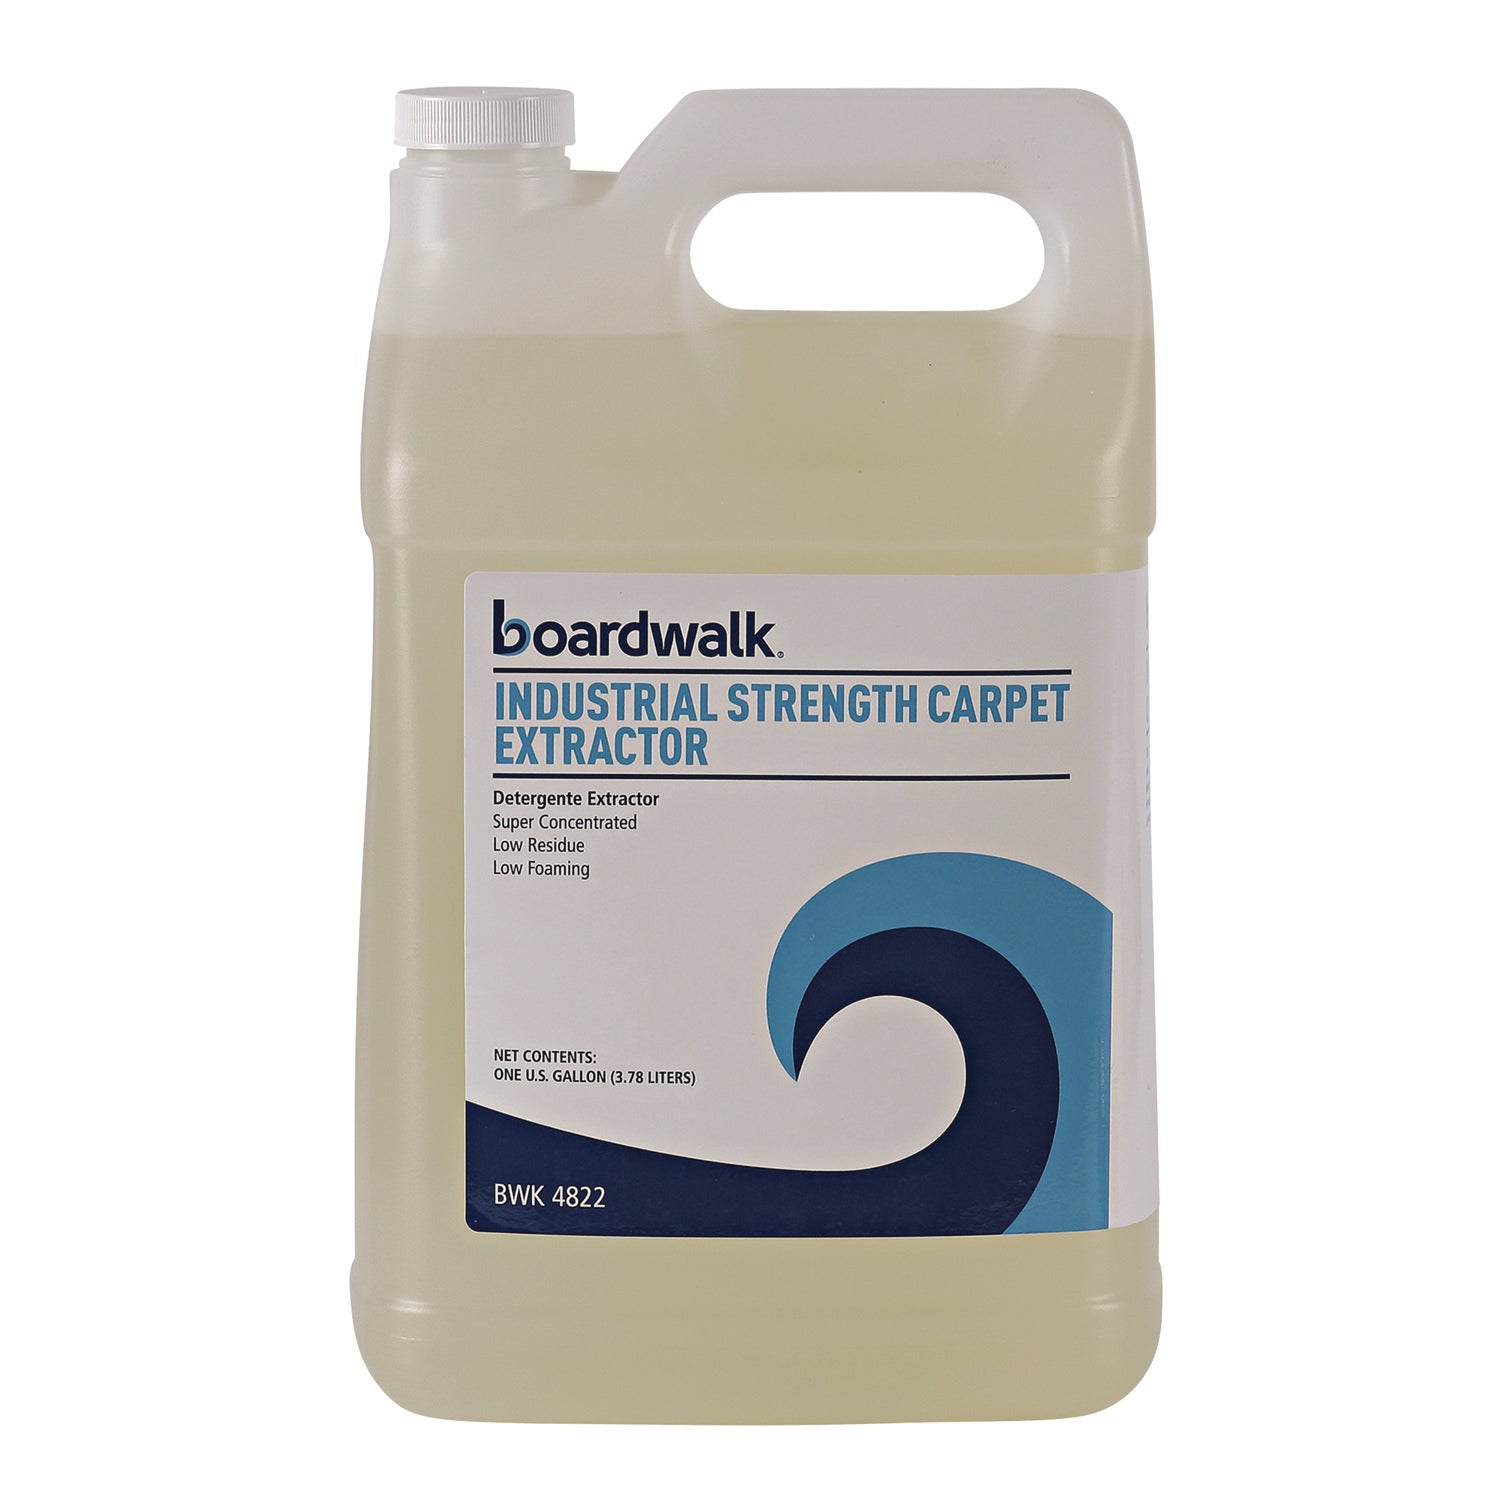 industrial-strength-carpet-extractor-clean-scent-1-gal-bottle-4-carton_bwk4822 - 2